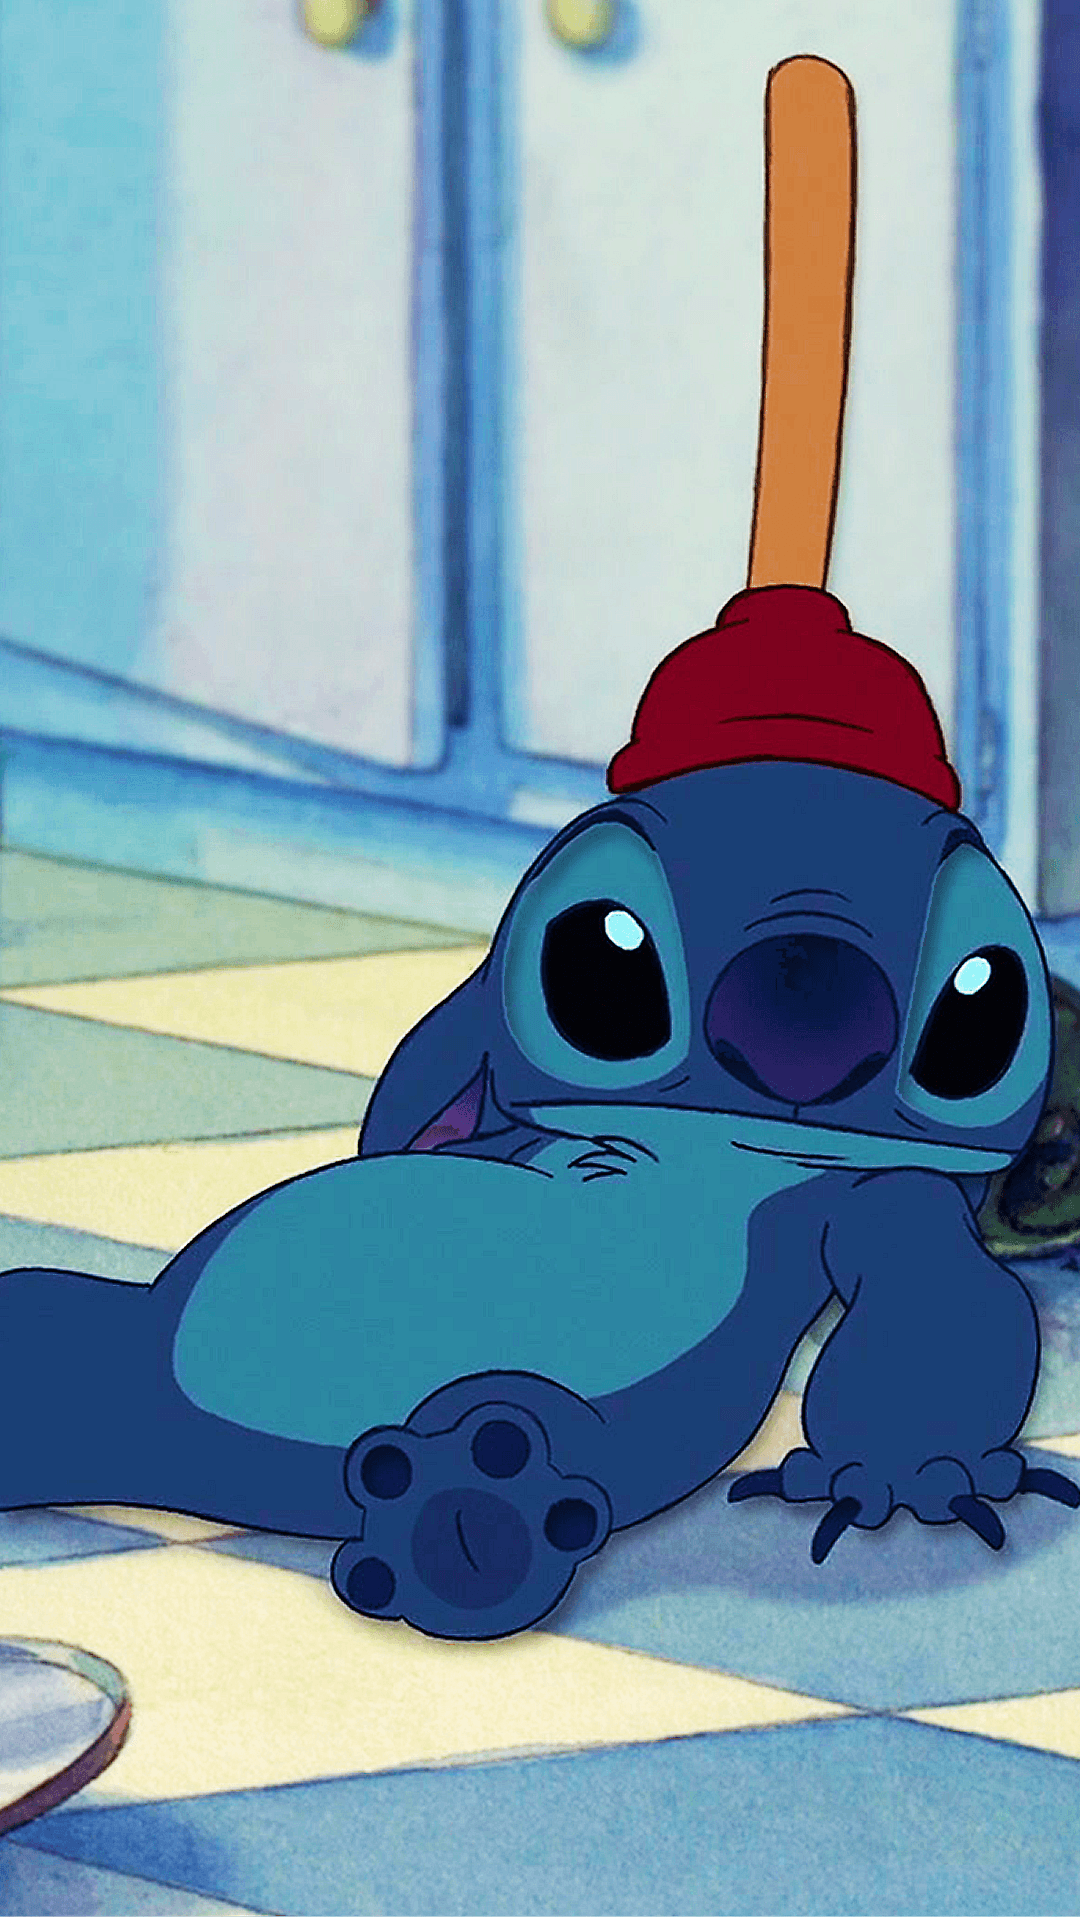 Lilo & Stitch Background - You Can Find The Rest On My Website